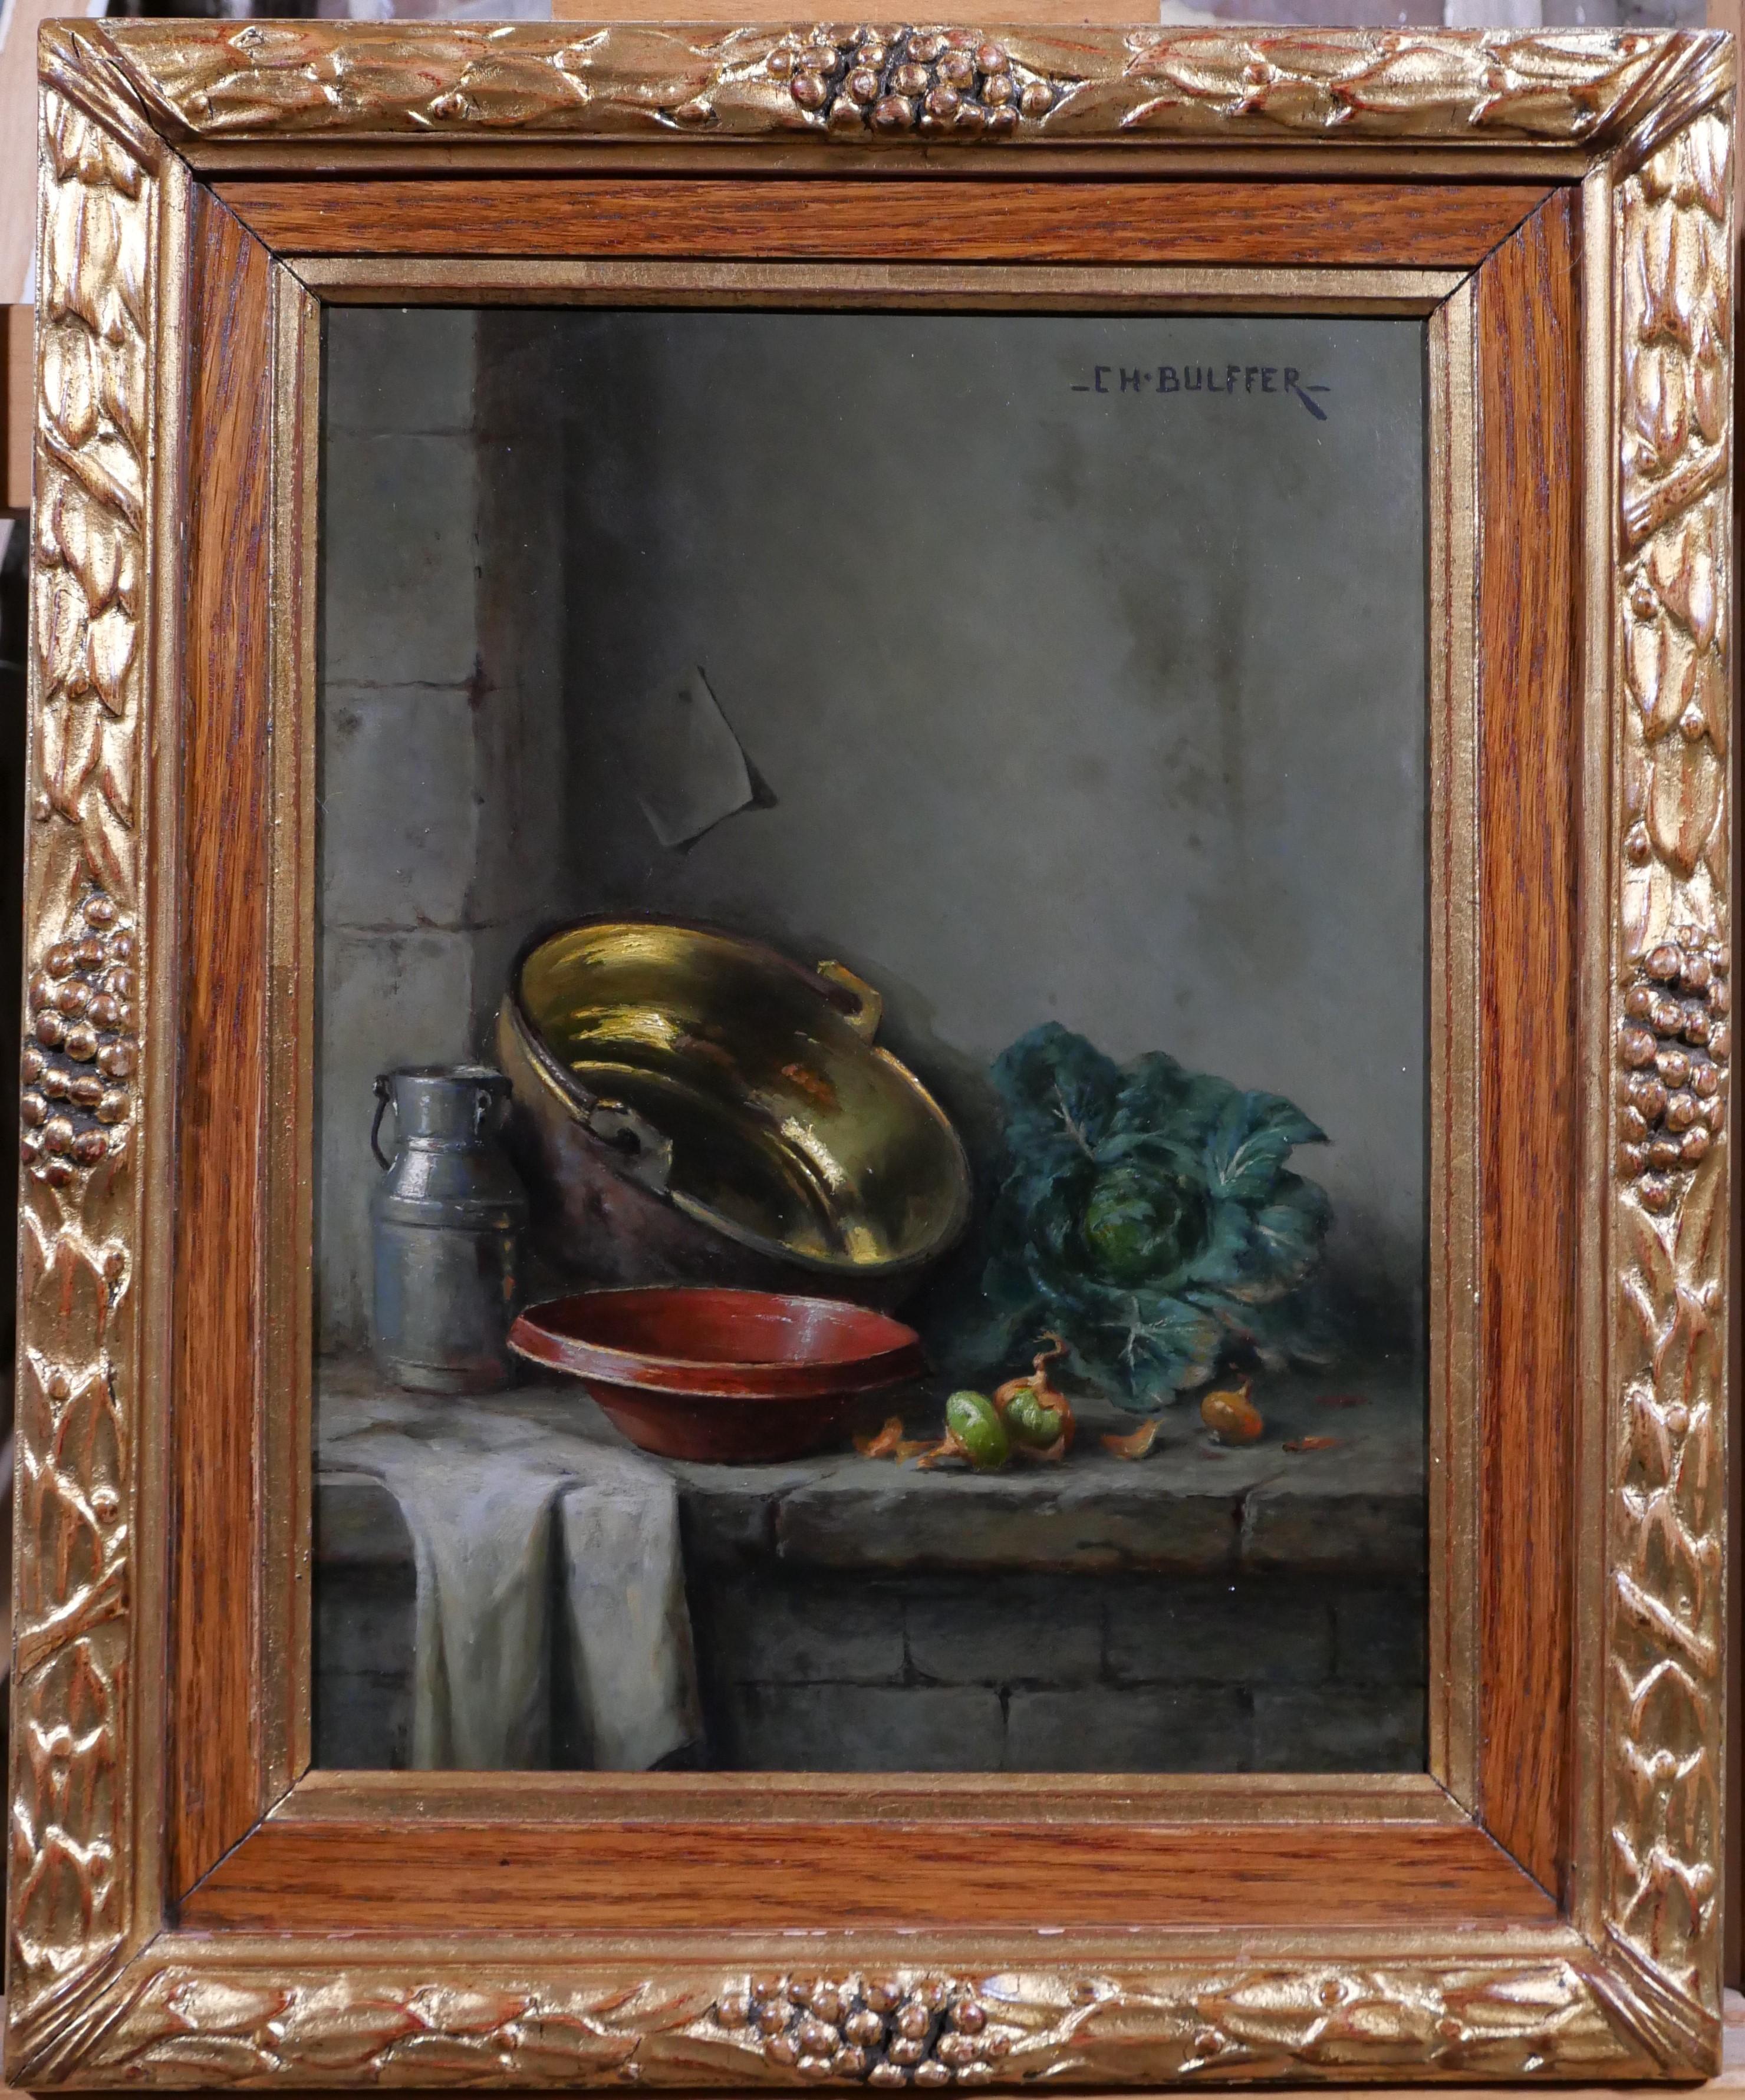 Still life with vegetables - Painting by Charles Bulffer